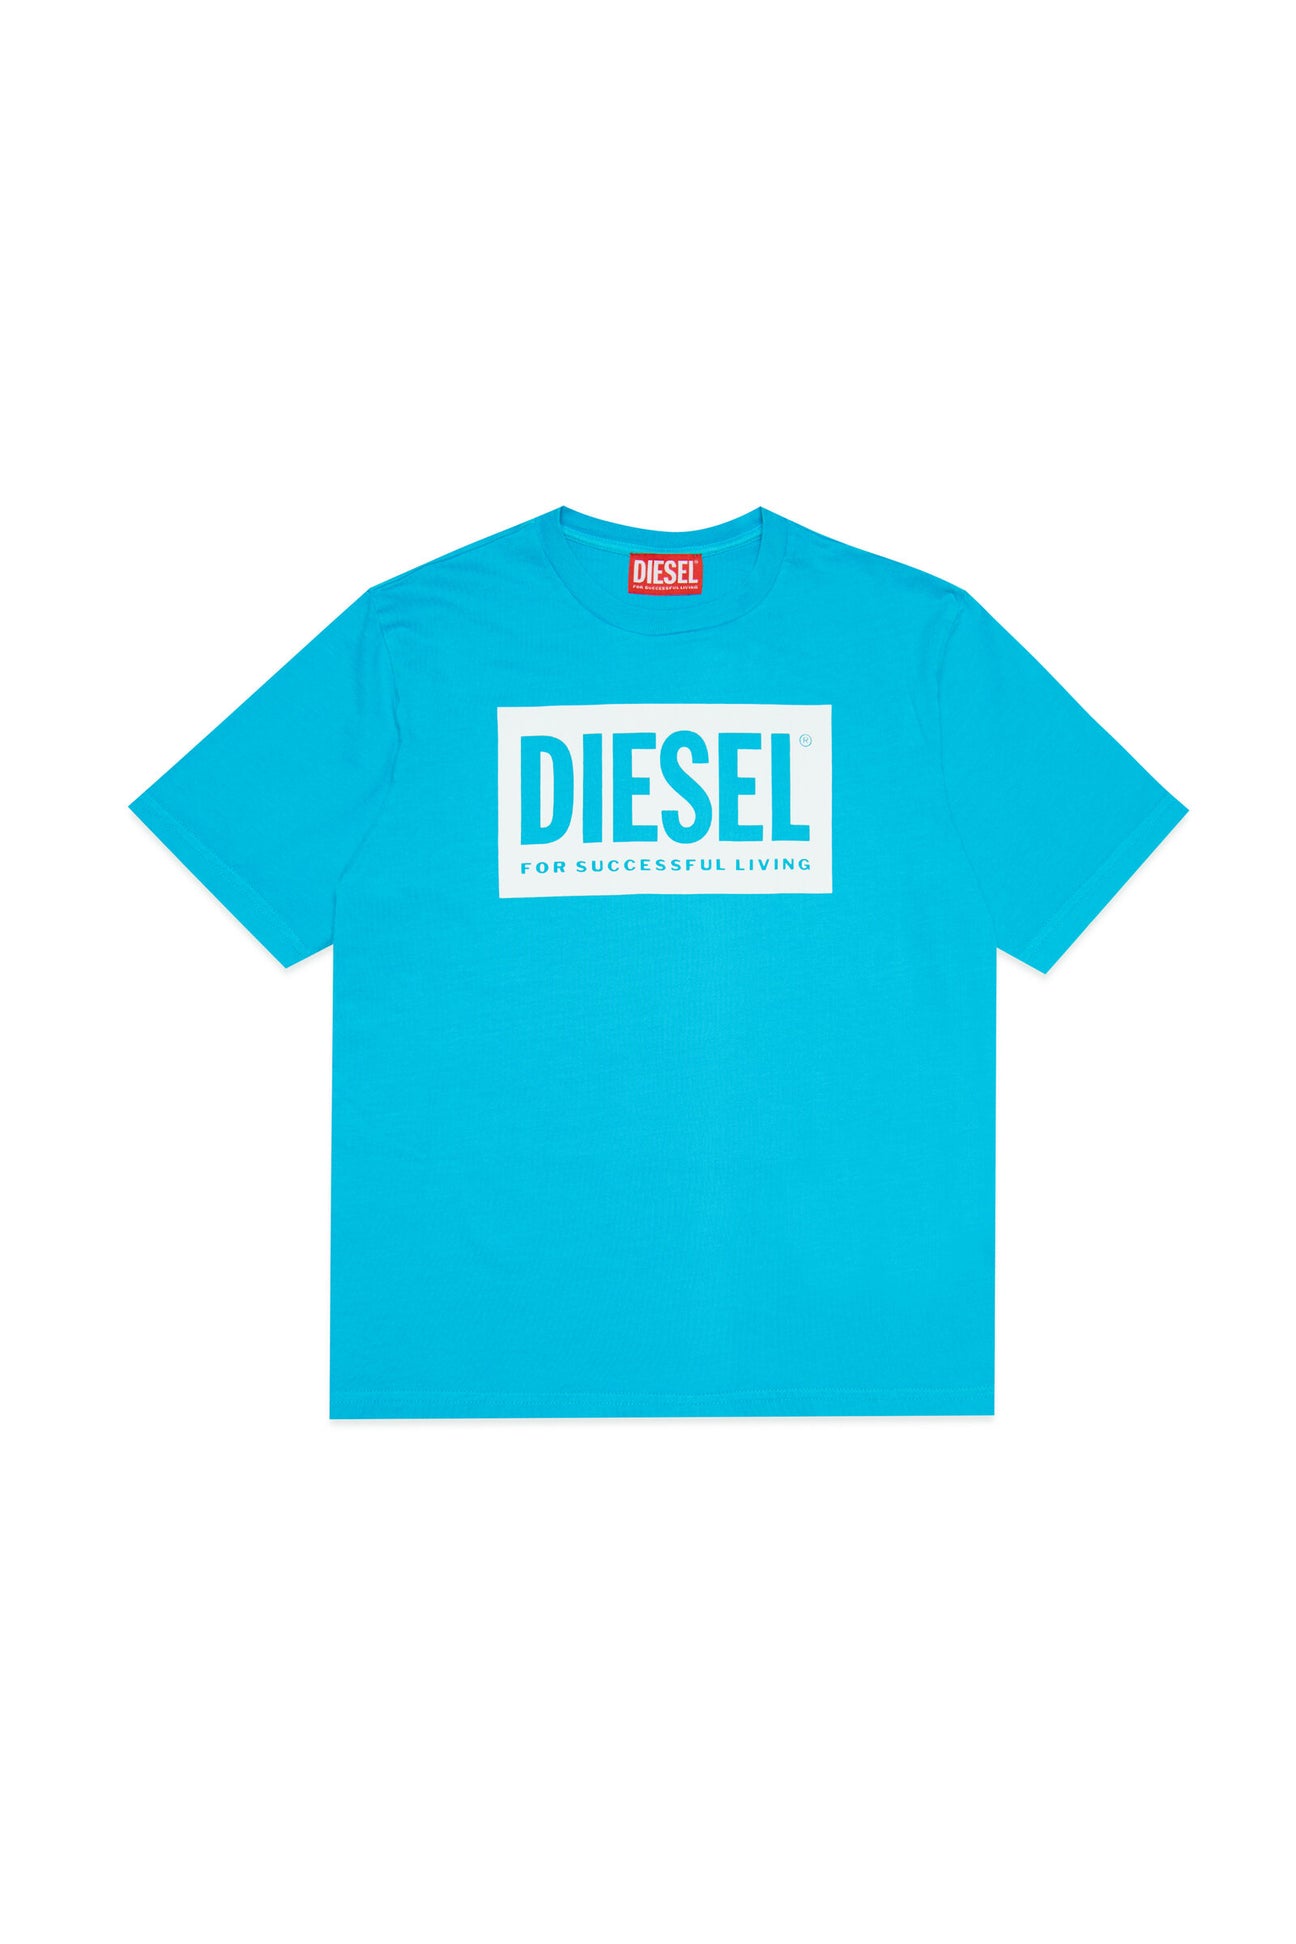 Fluorescent blue T-shirt in jersey with logo Fluorescent blue T-shirt in jersey with logo